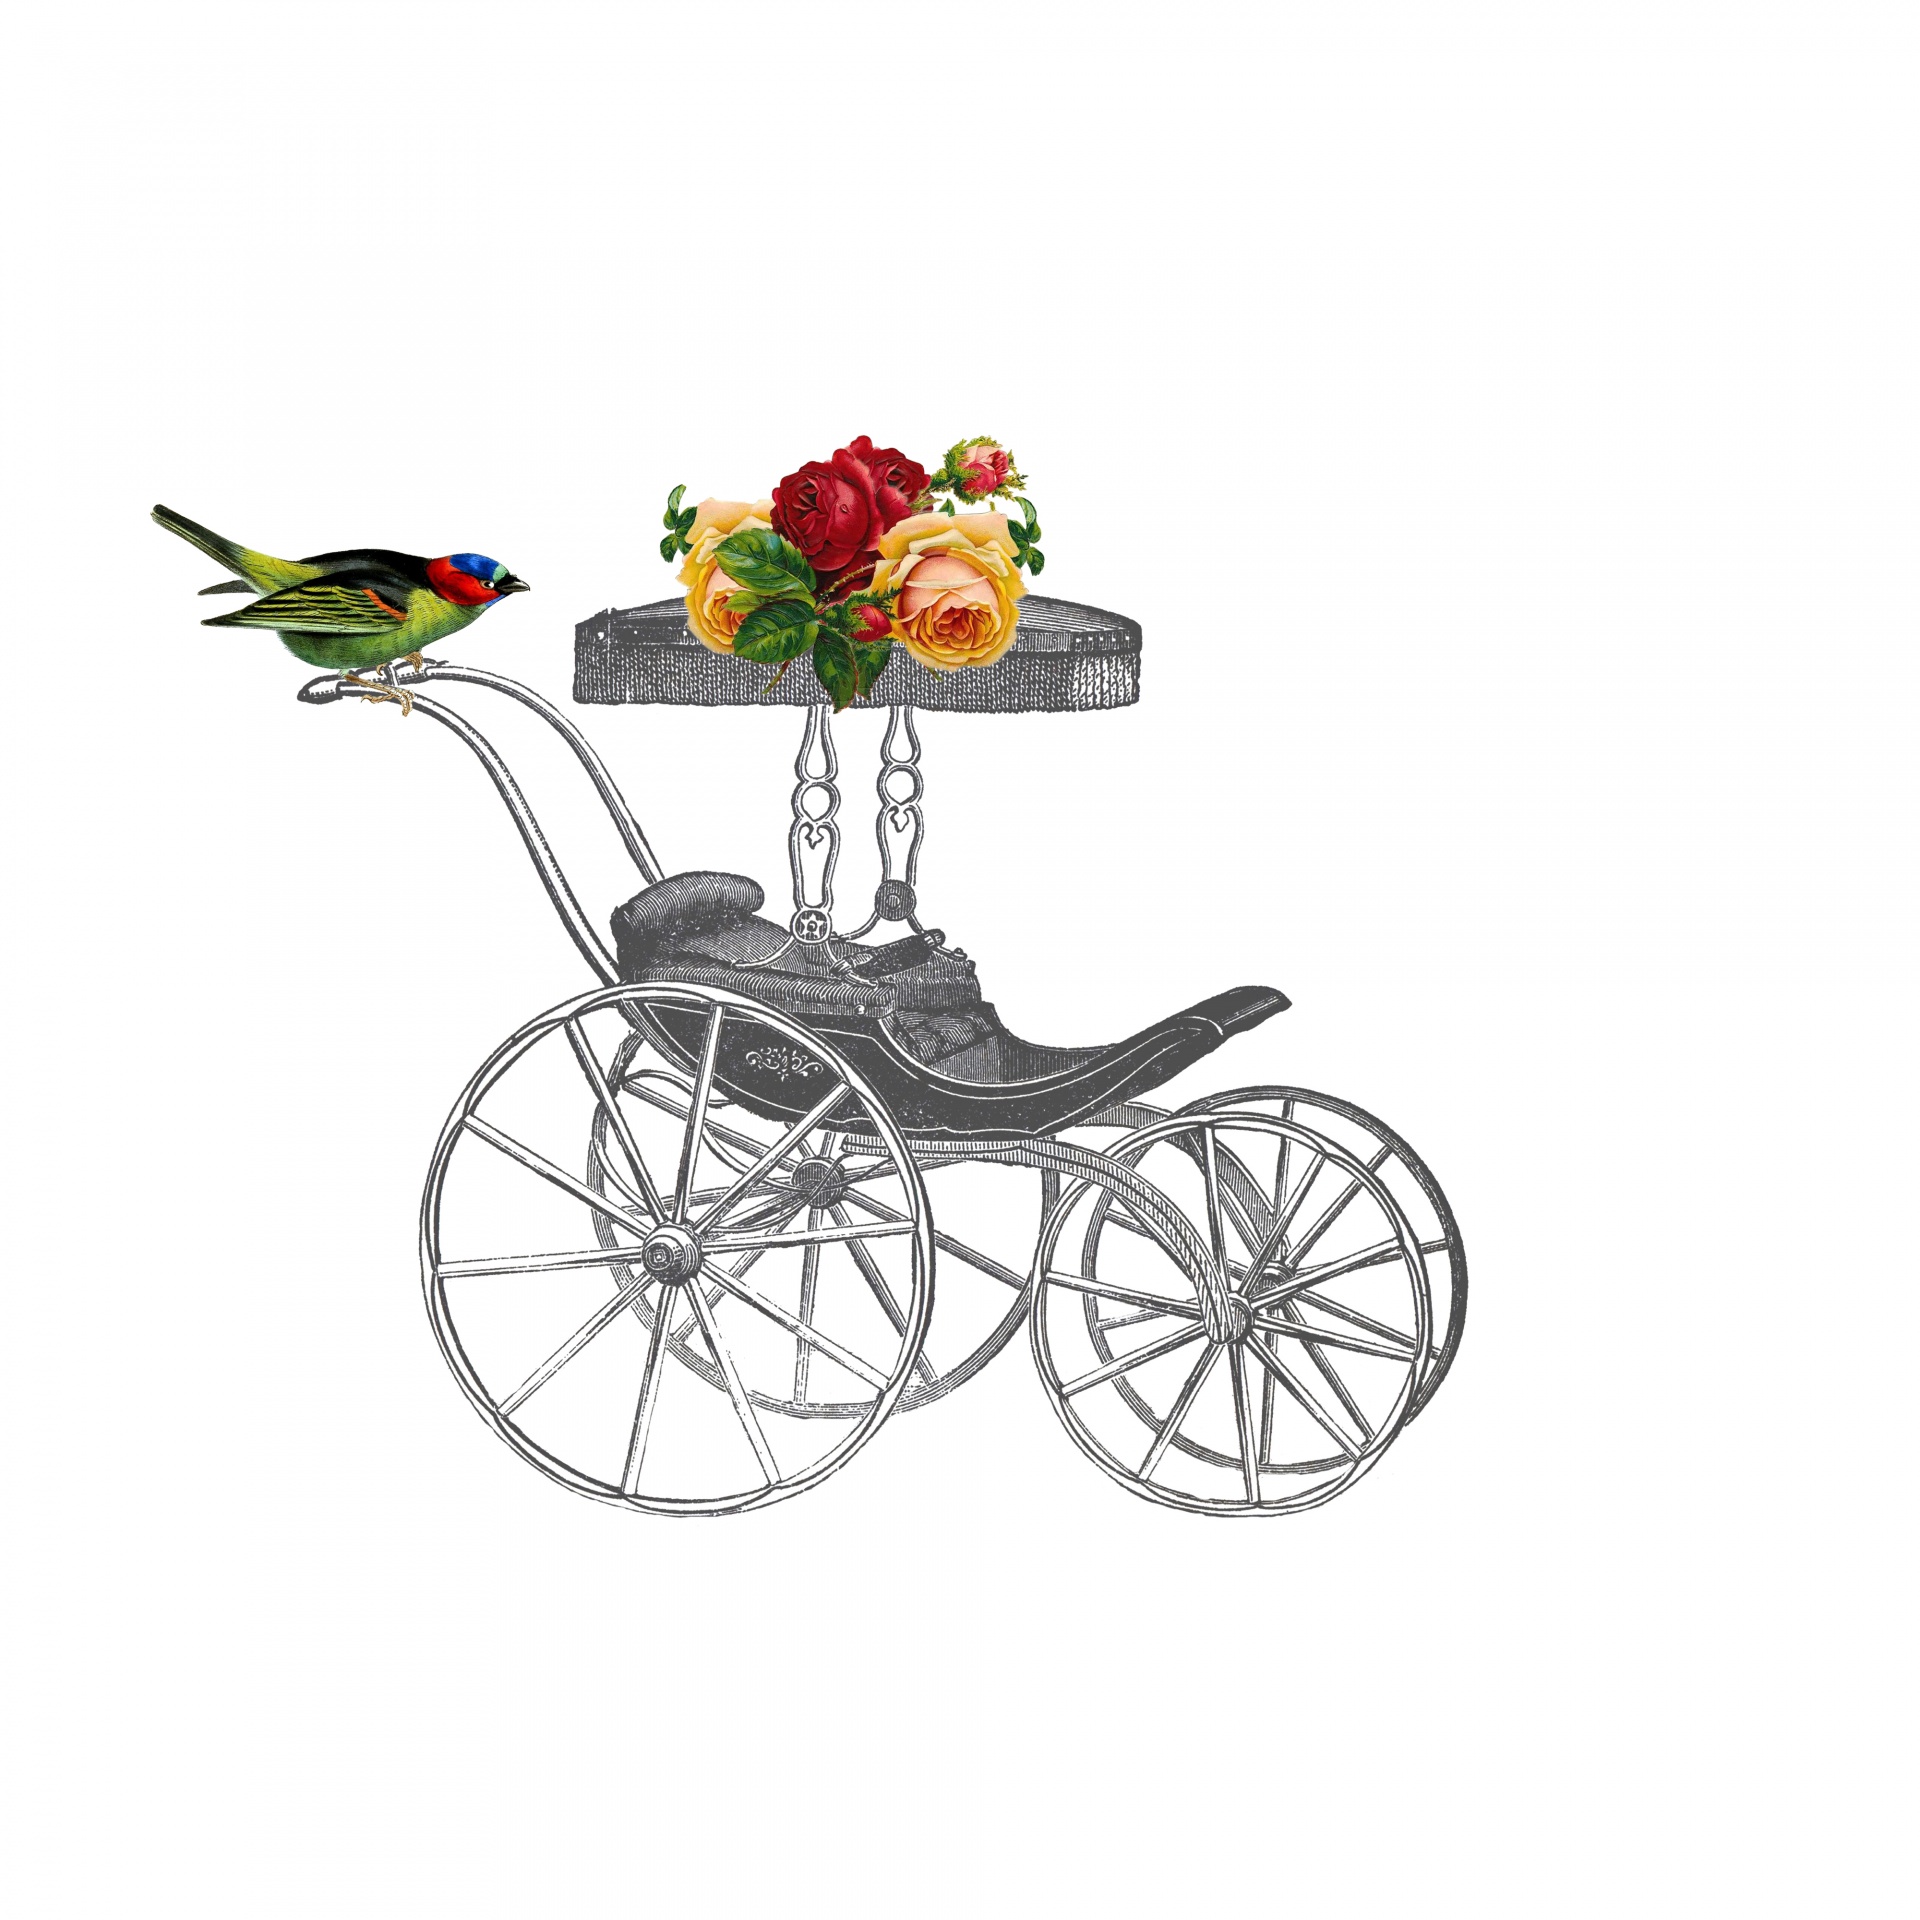 baby carriage illustration